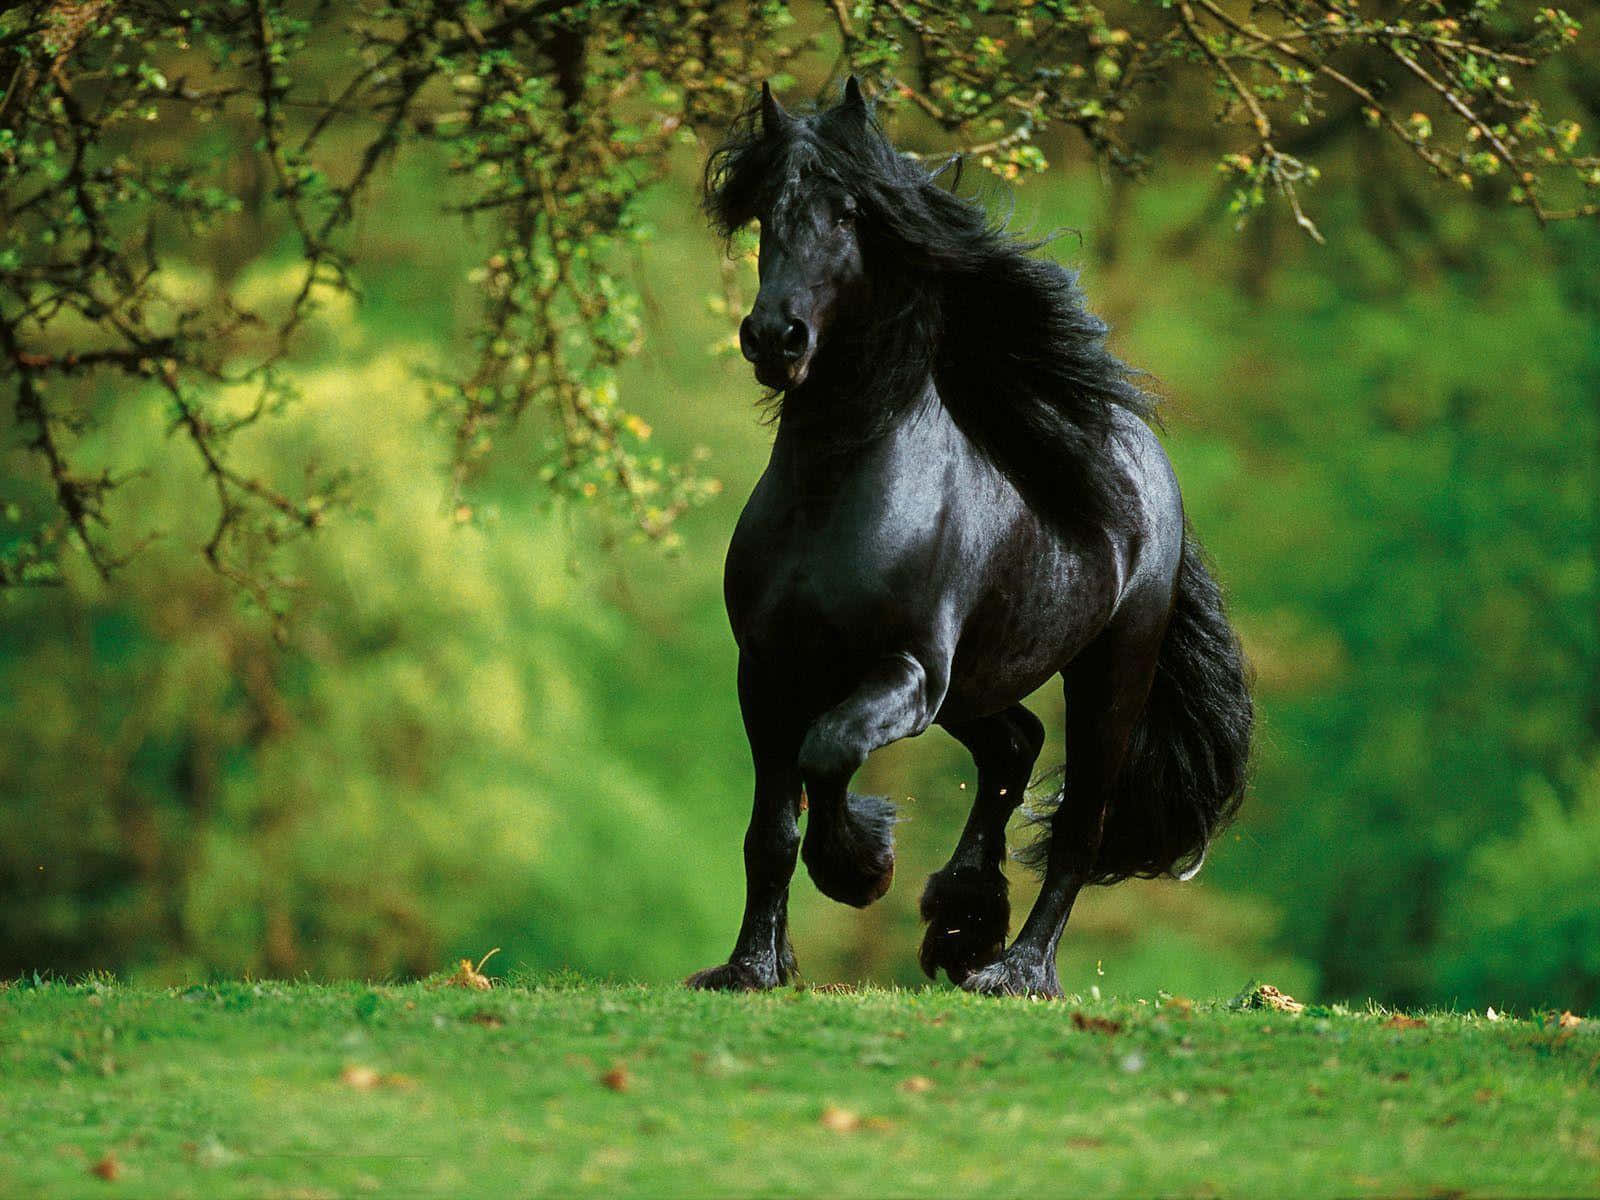 Admiring the beauty of a Black Horse